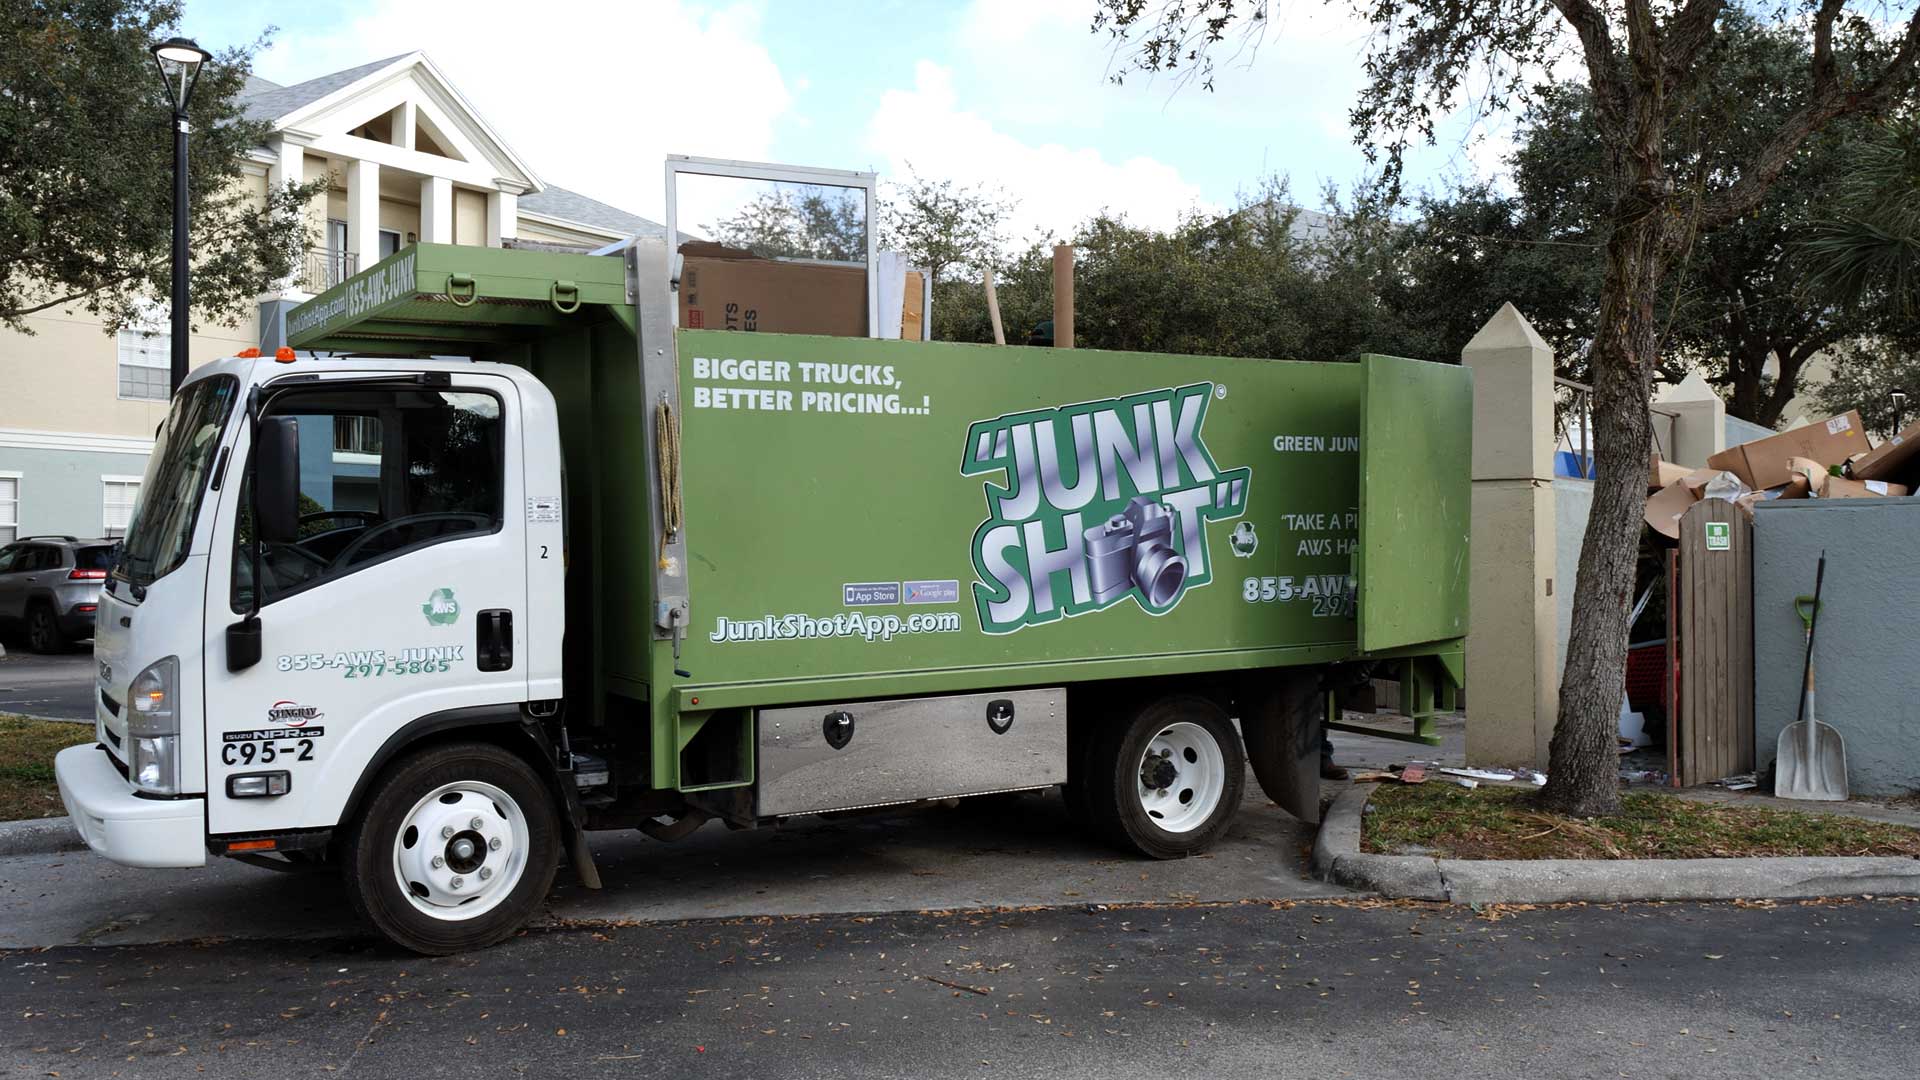 Accelerated Waste Solutions Junk Removal Savings